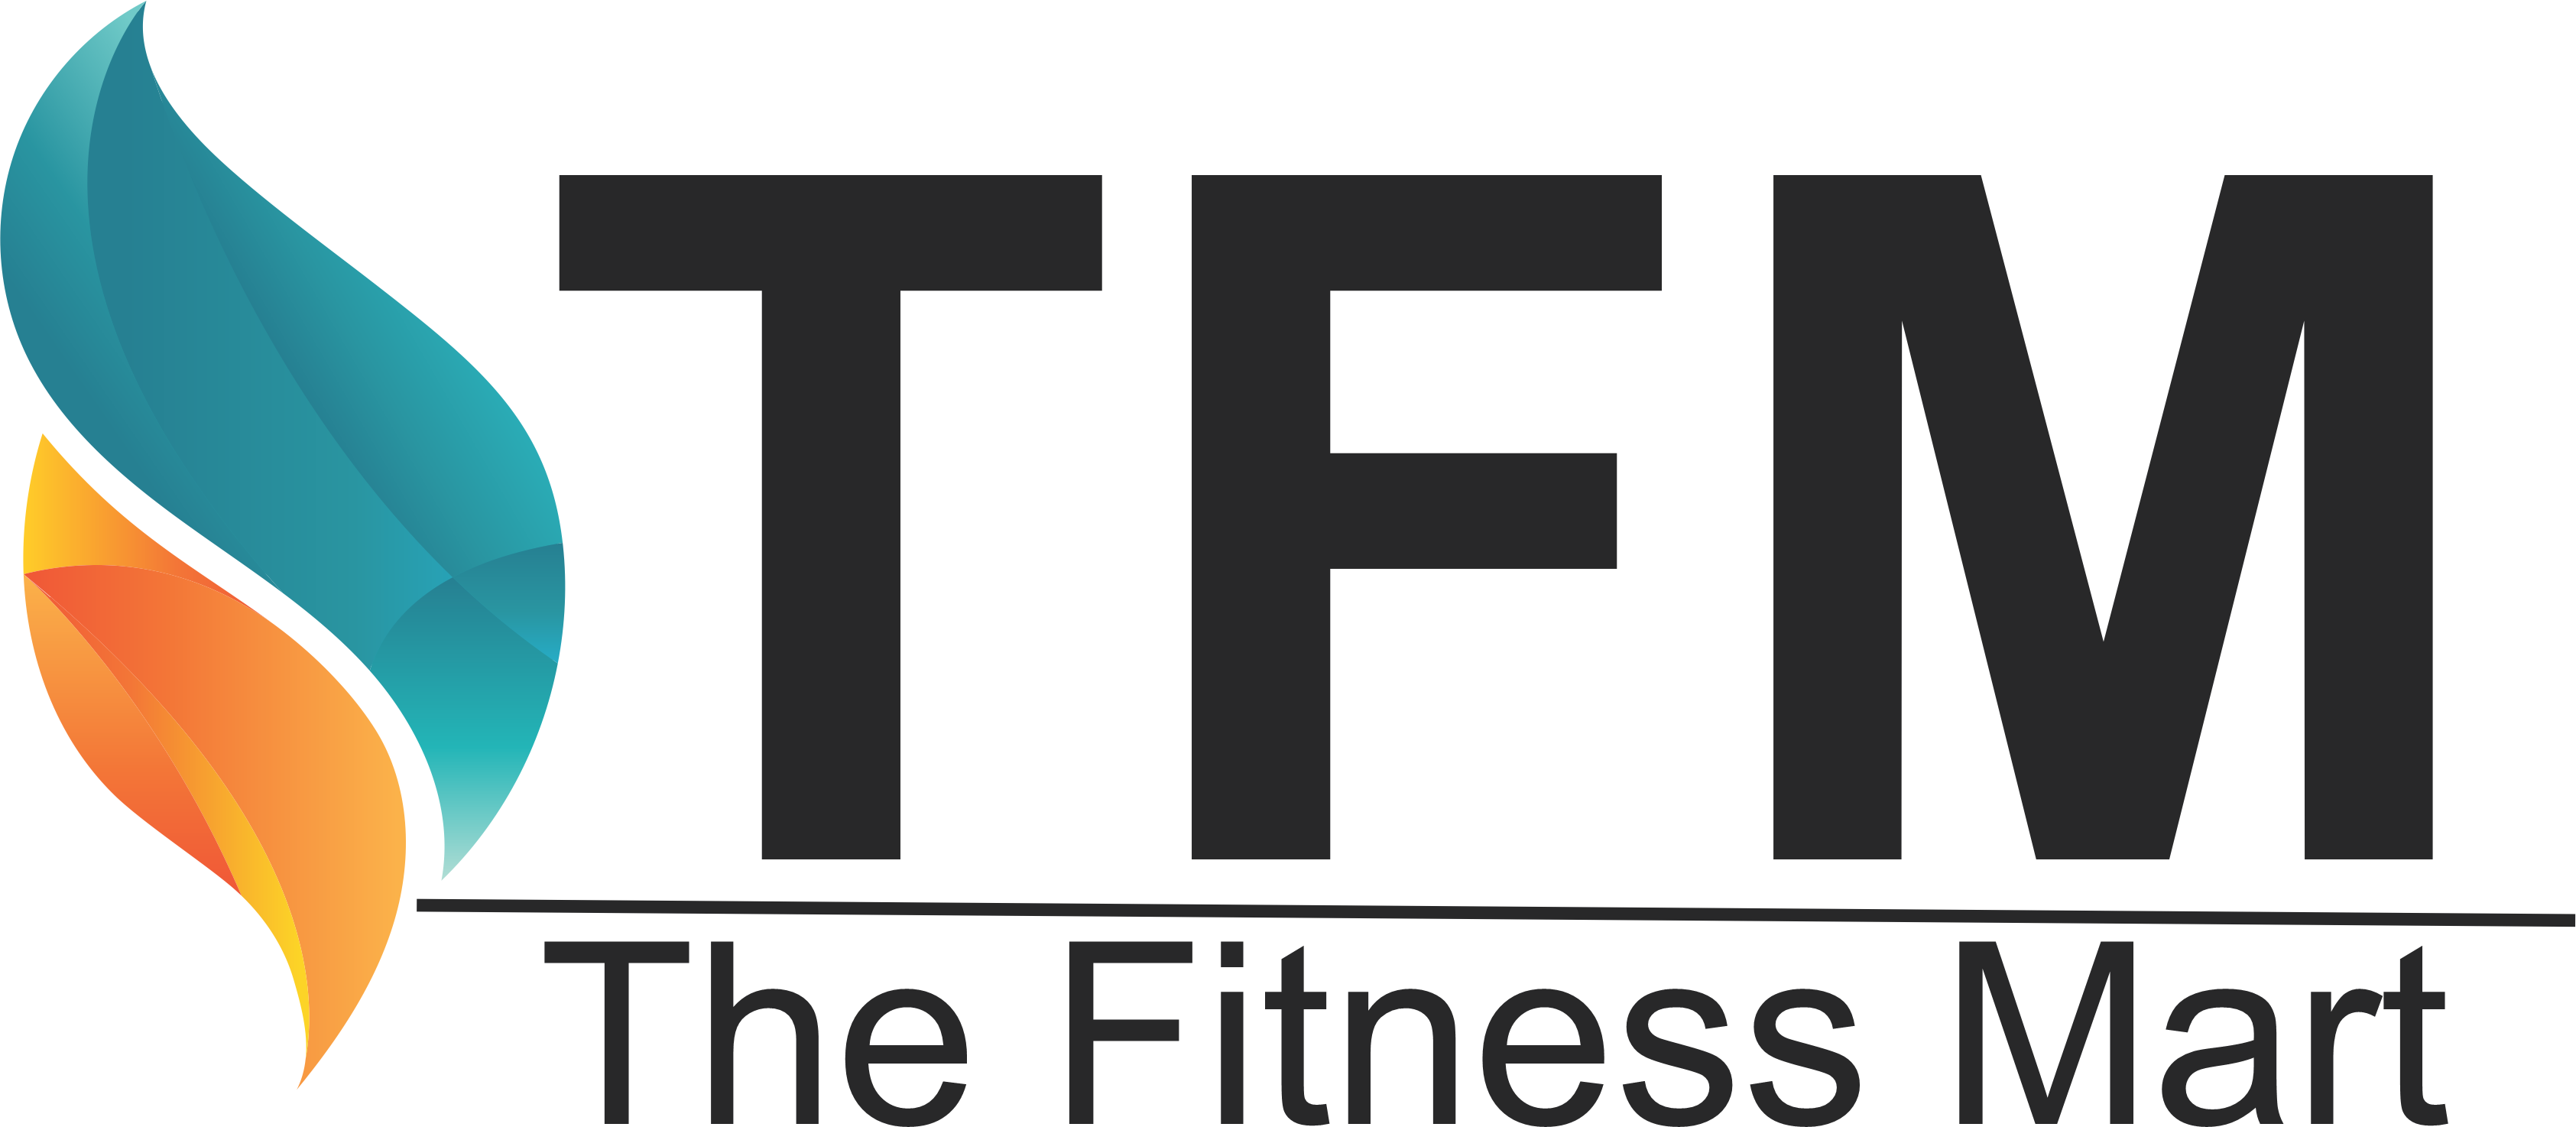 The Fitness Mart